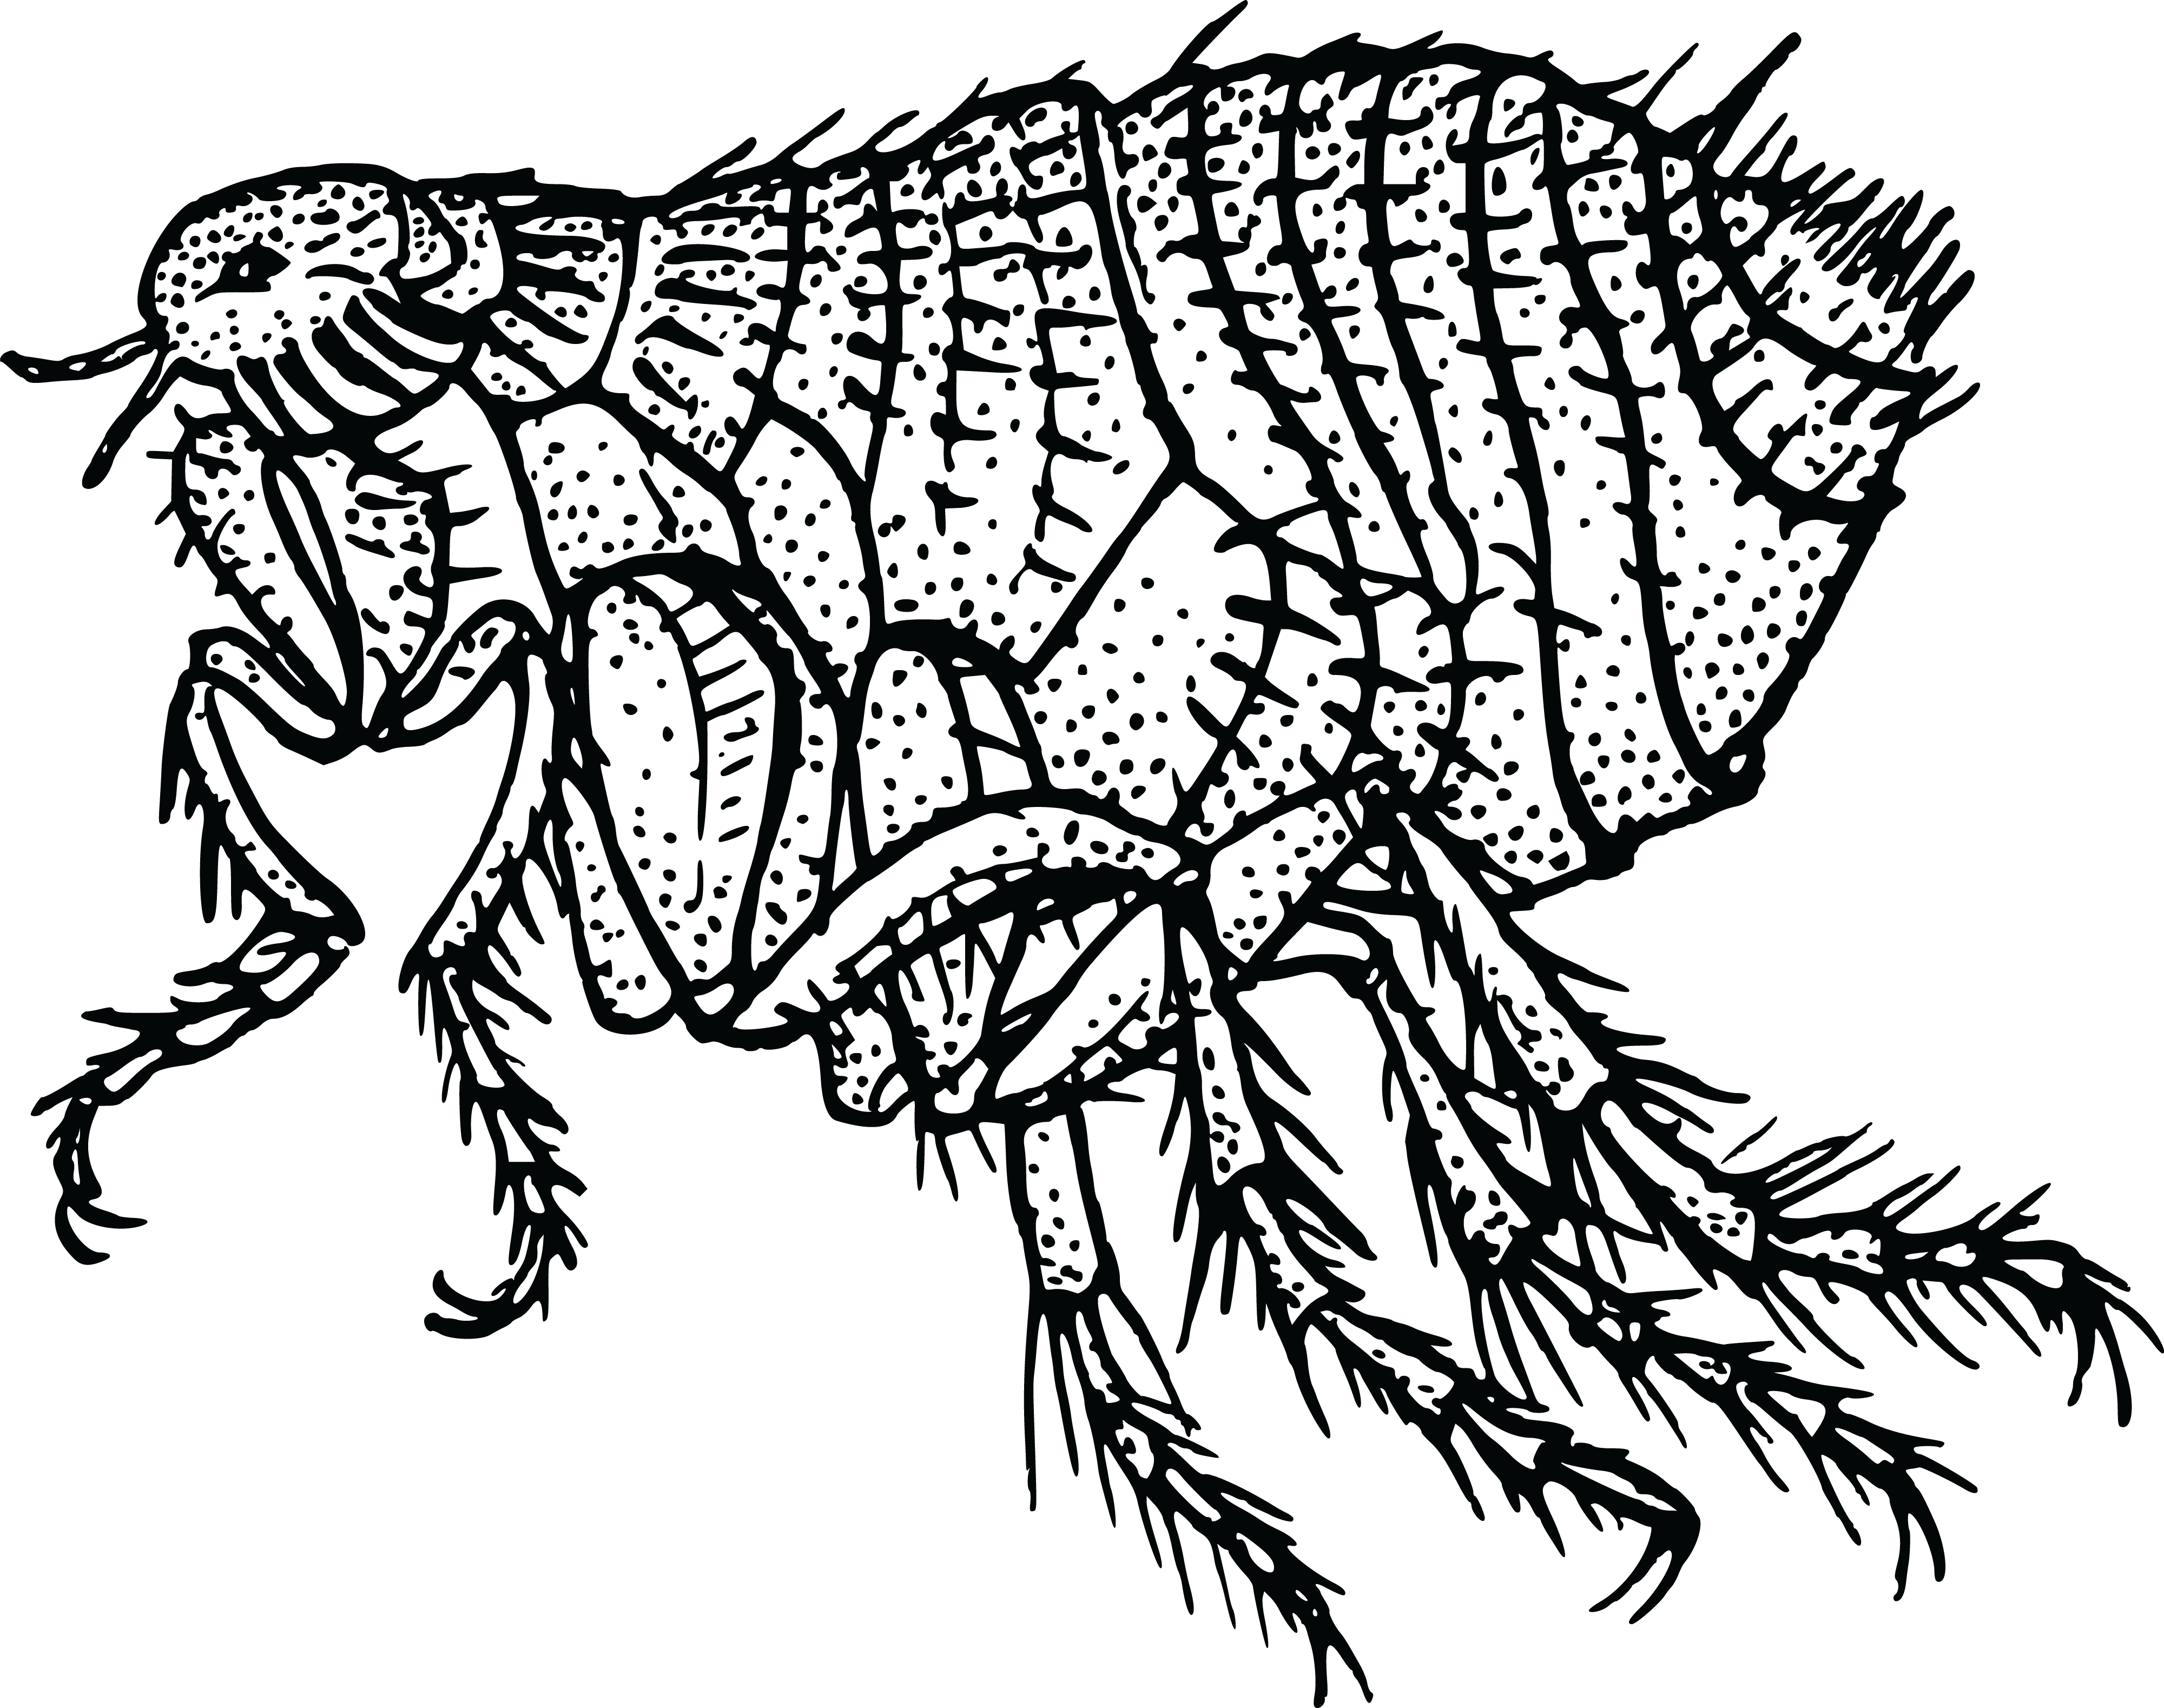  Clipart Of A flea #0001705 ., Flea PNG Black And White - Free PNG